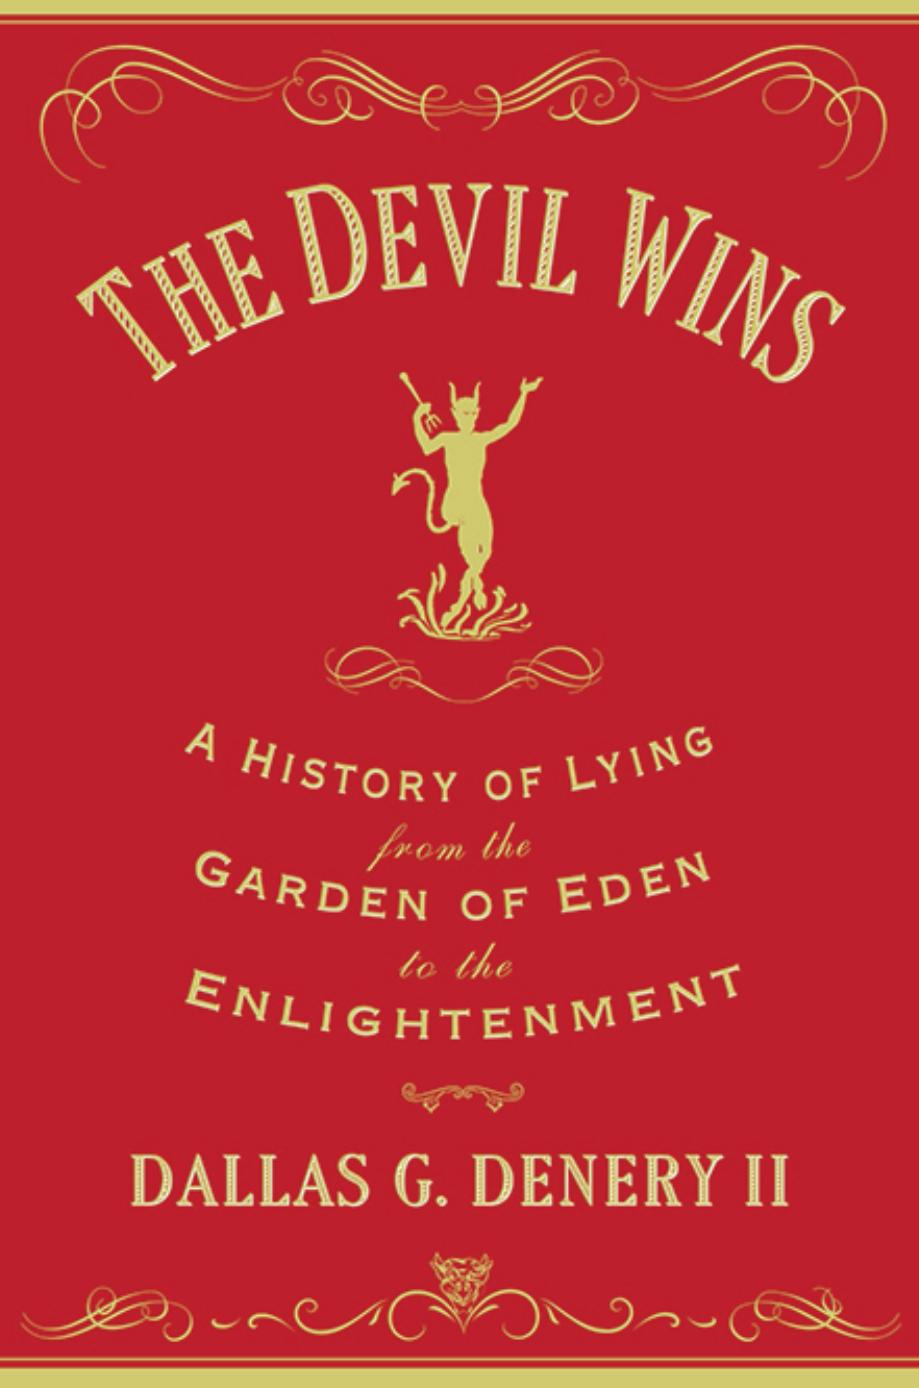 The Devil Wins: A History of Lying from the Garden of Eden to the Enlightenment by Dallas G. Denery II